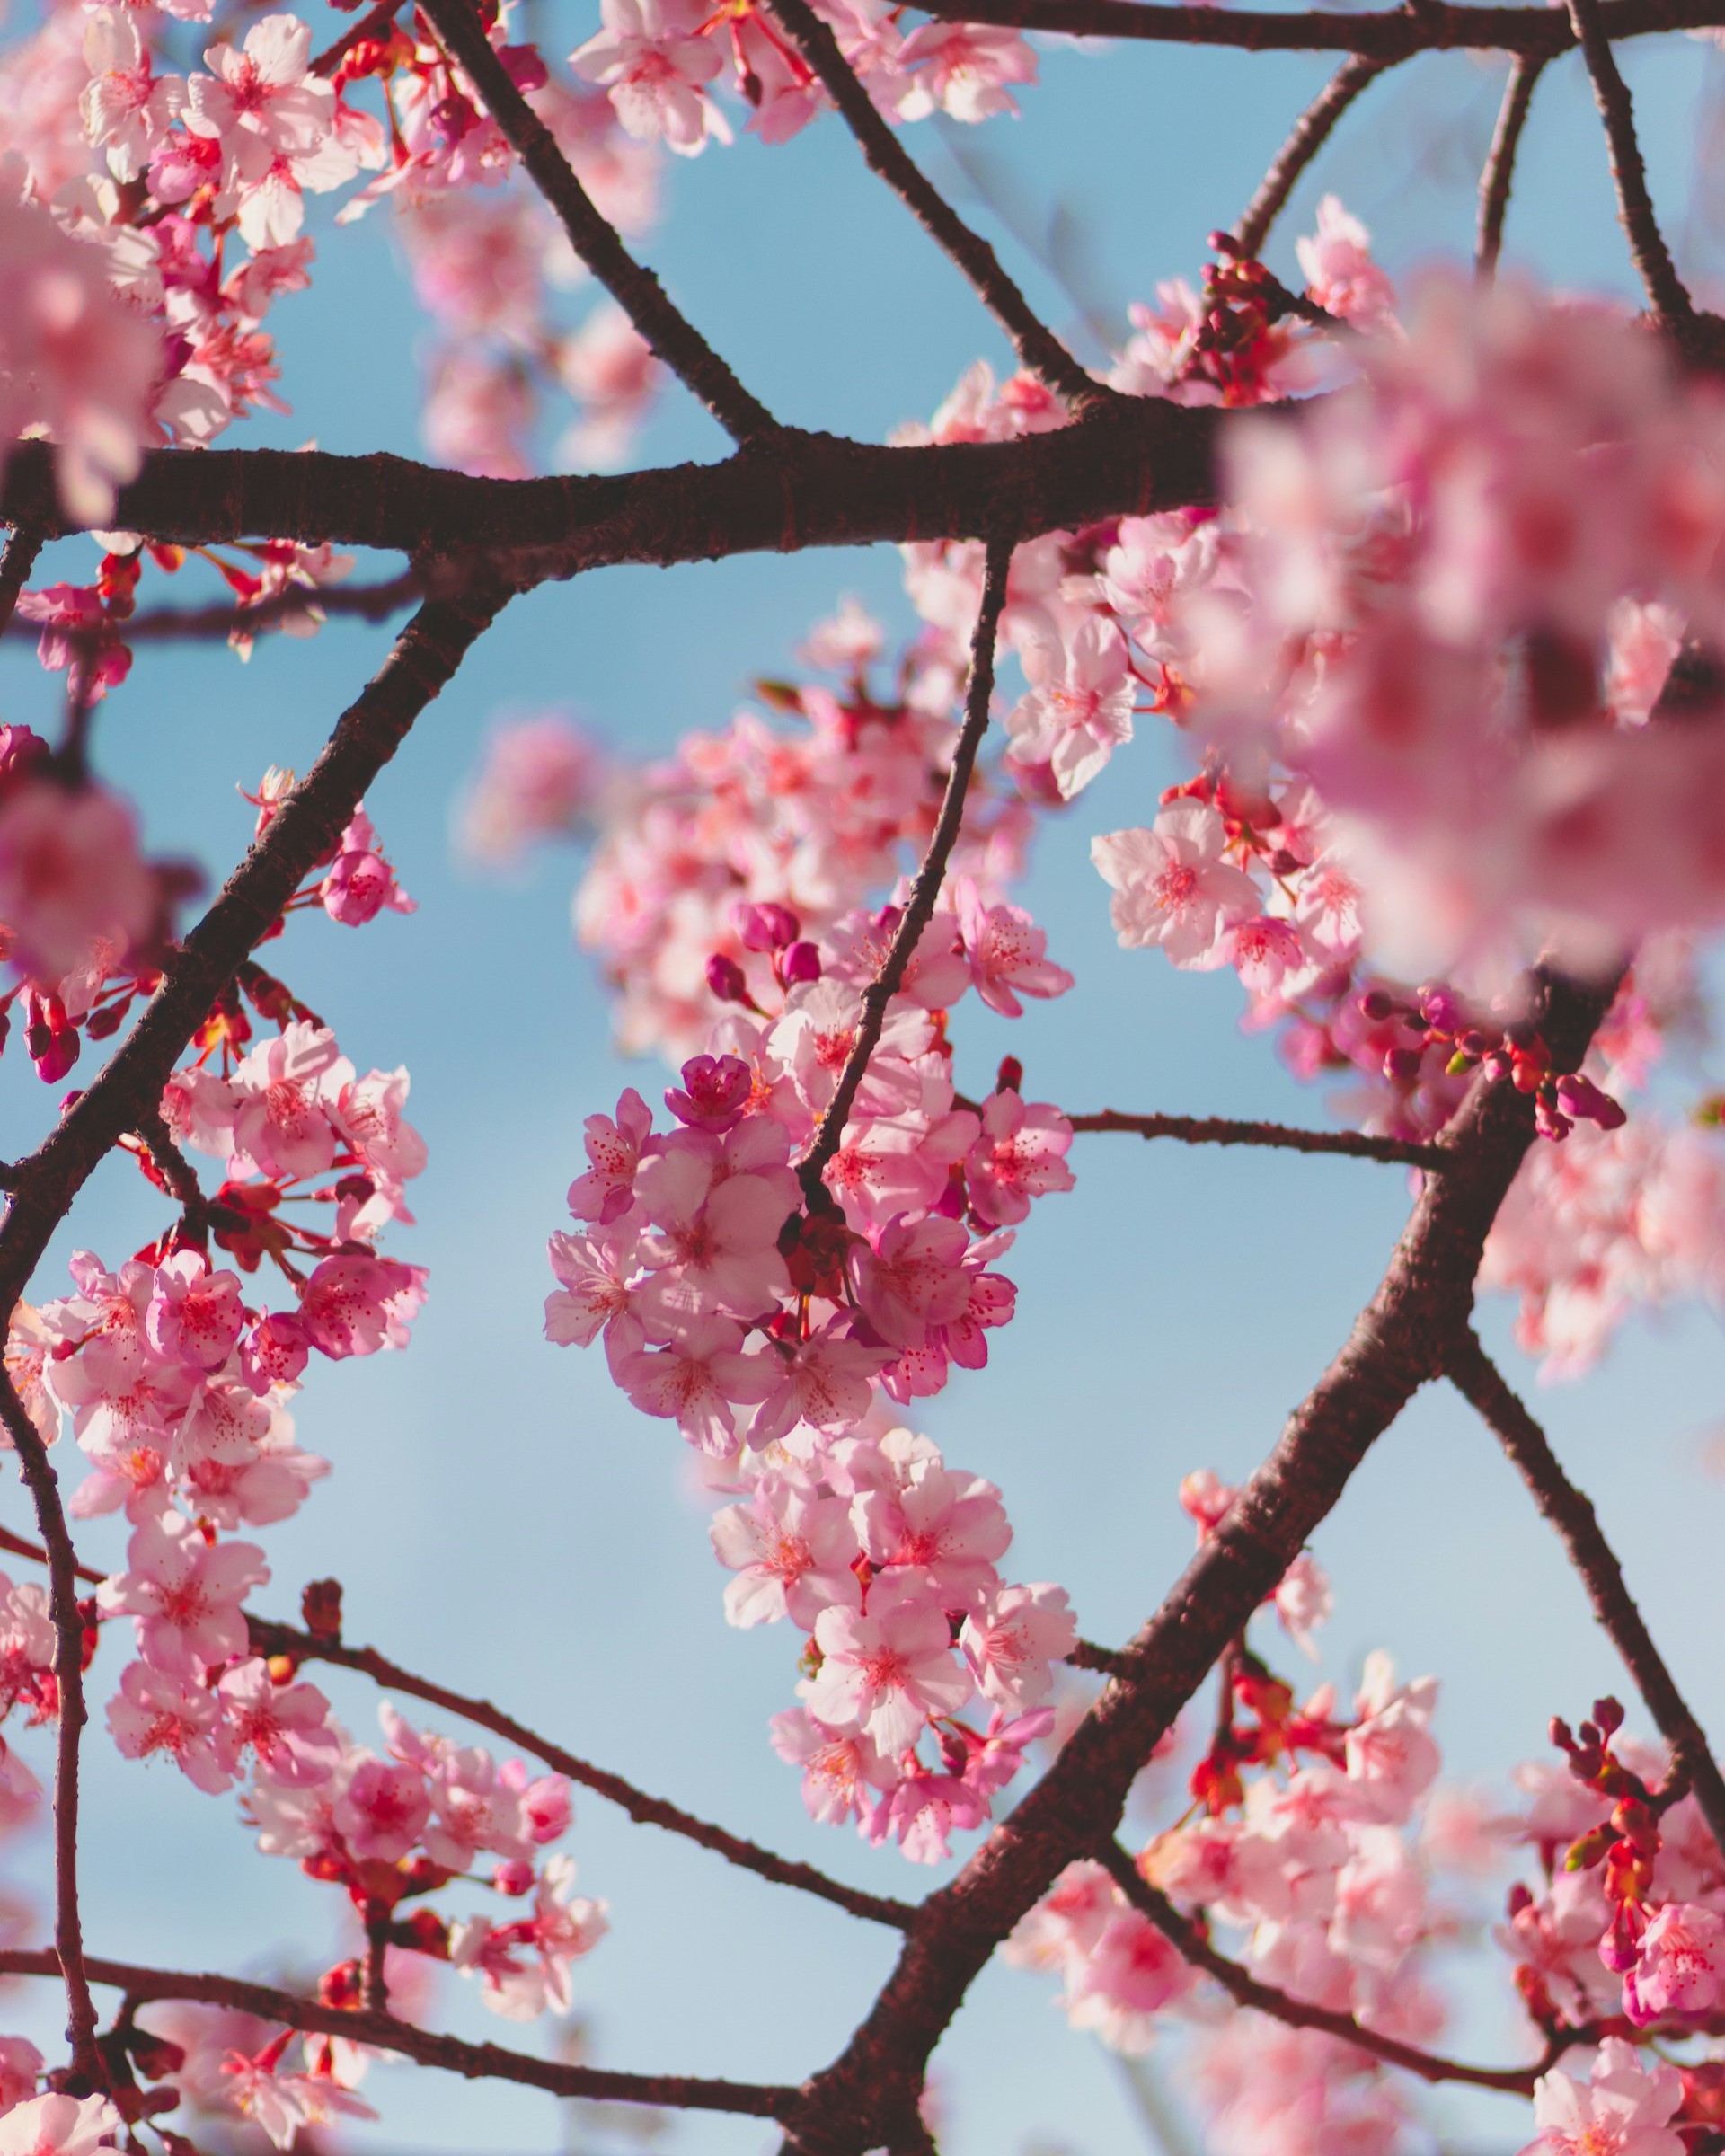 Branches with pink Cherry blossoms in front of a blue sky